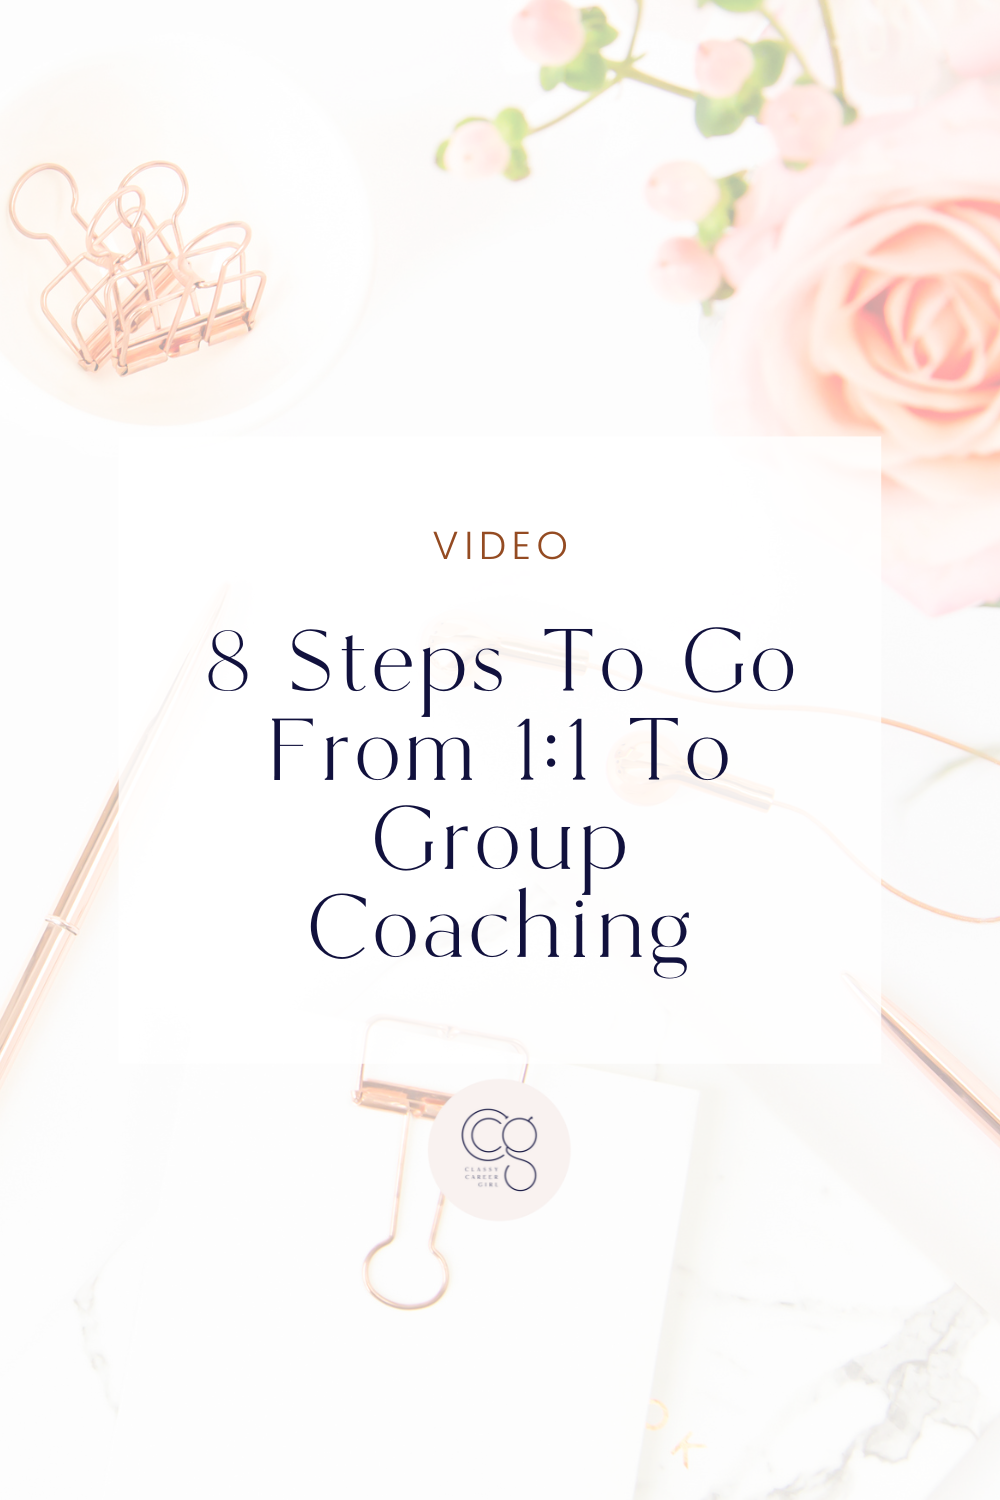 Coach Classes: 8 Steps To Go From 1:1 To Group Coaching